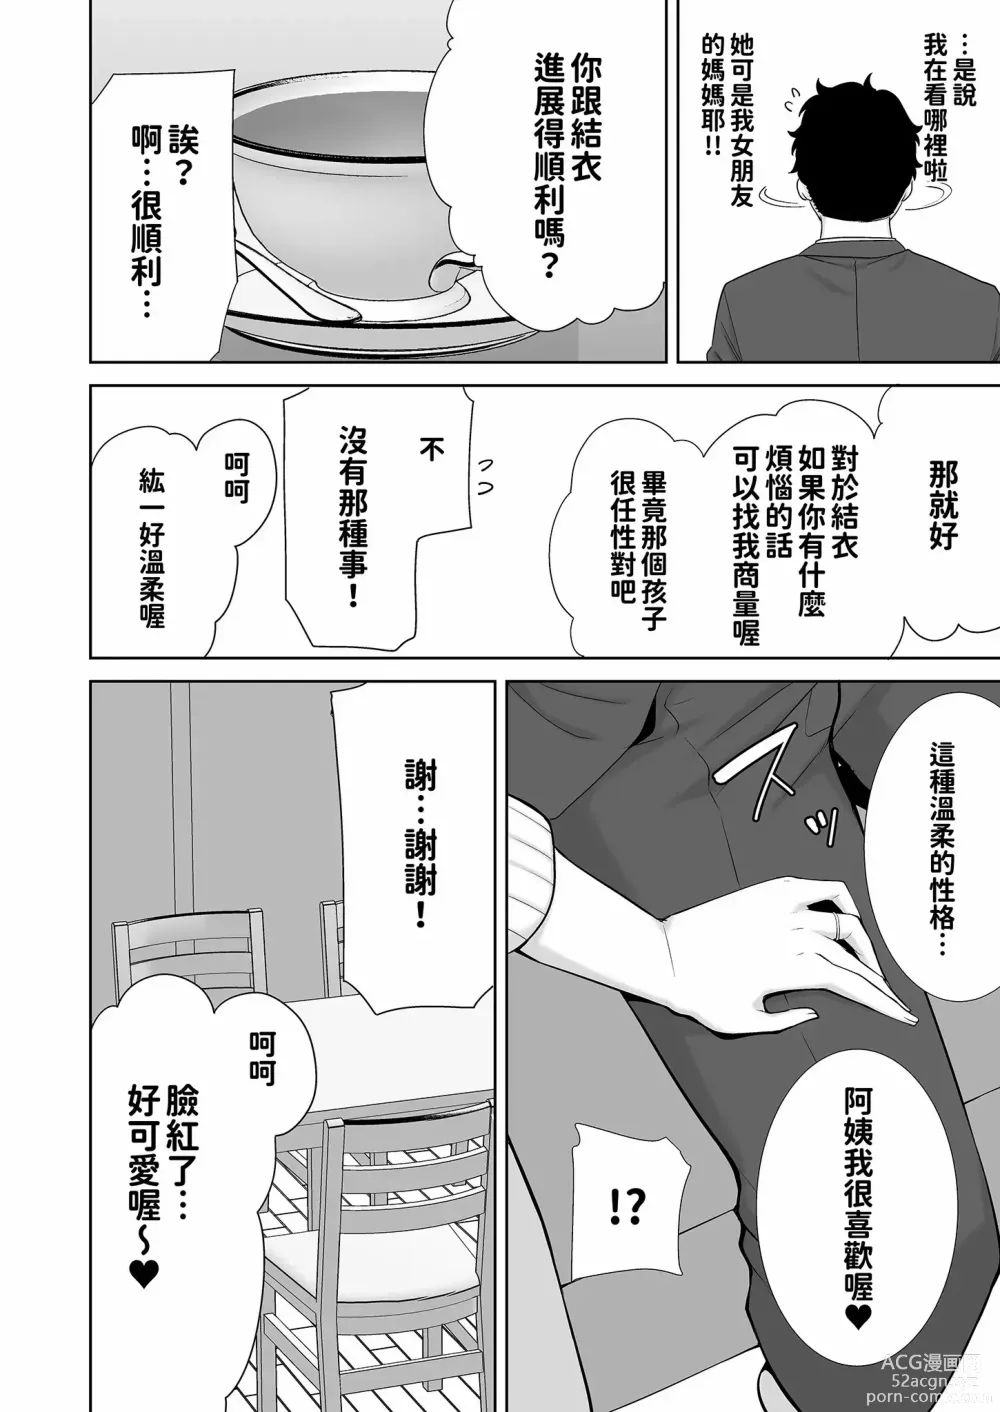 Page 14 of doujinshi かのまましんどろーむ1+2 （无修正） Glass.ver